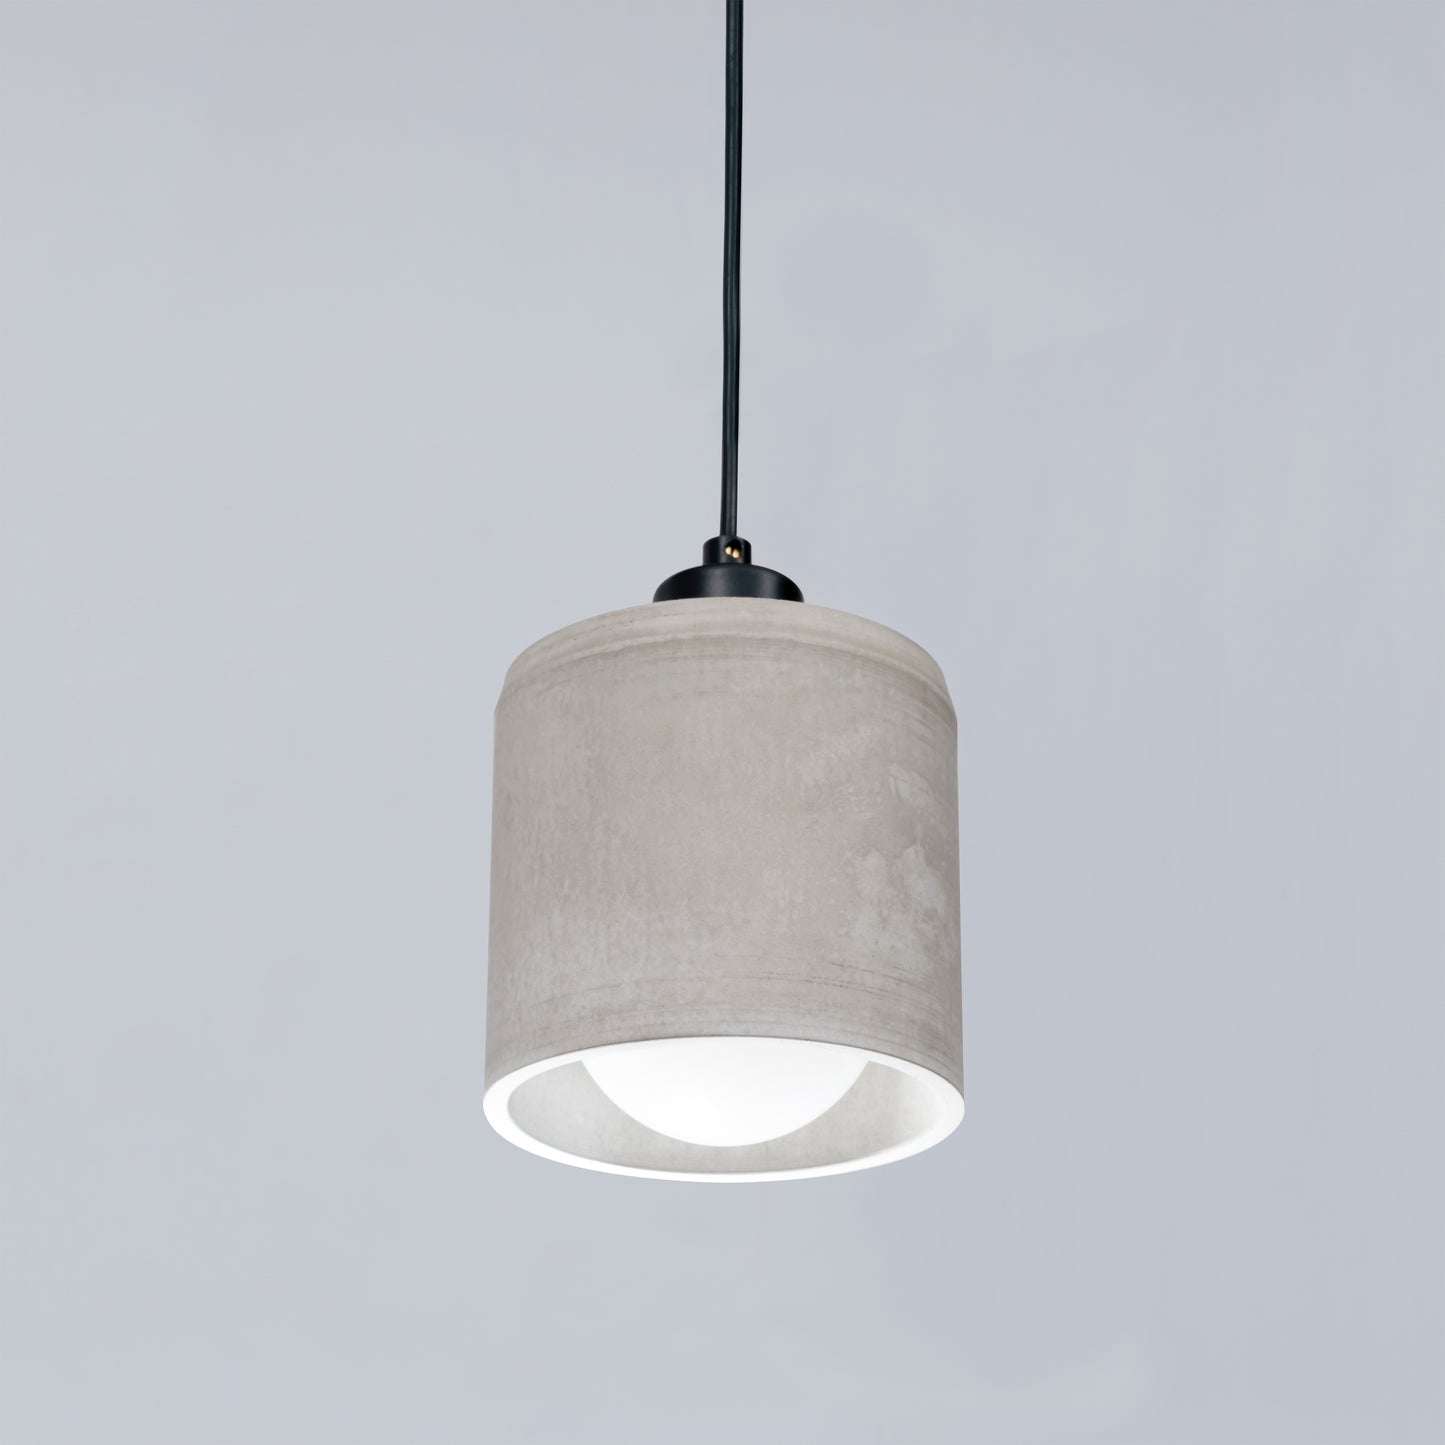 Gray Cylinder Concrete Ceiling Lighting